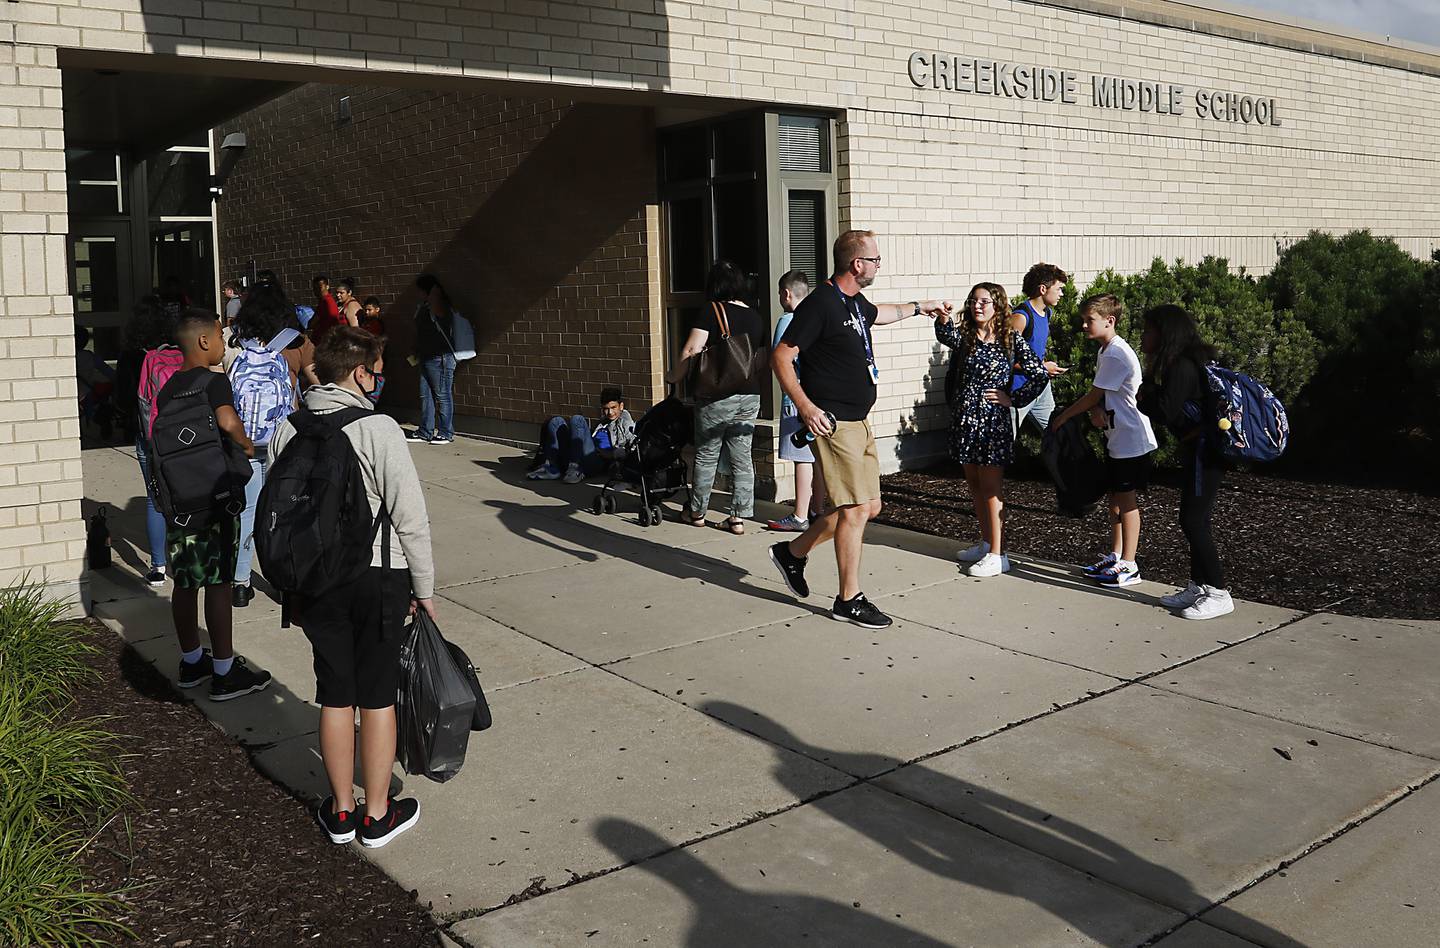 Dean of Students and physical education teacher Jason Laidig greats students as thy wait for the school doors to open Monday morning, August 15, 2022, during the first day of school at District 200’s Creekside Middle School. Many McHenry County area schools return to session this week.